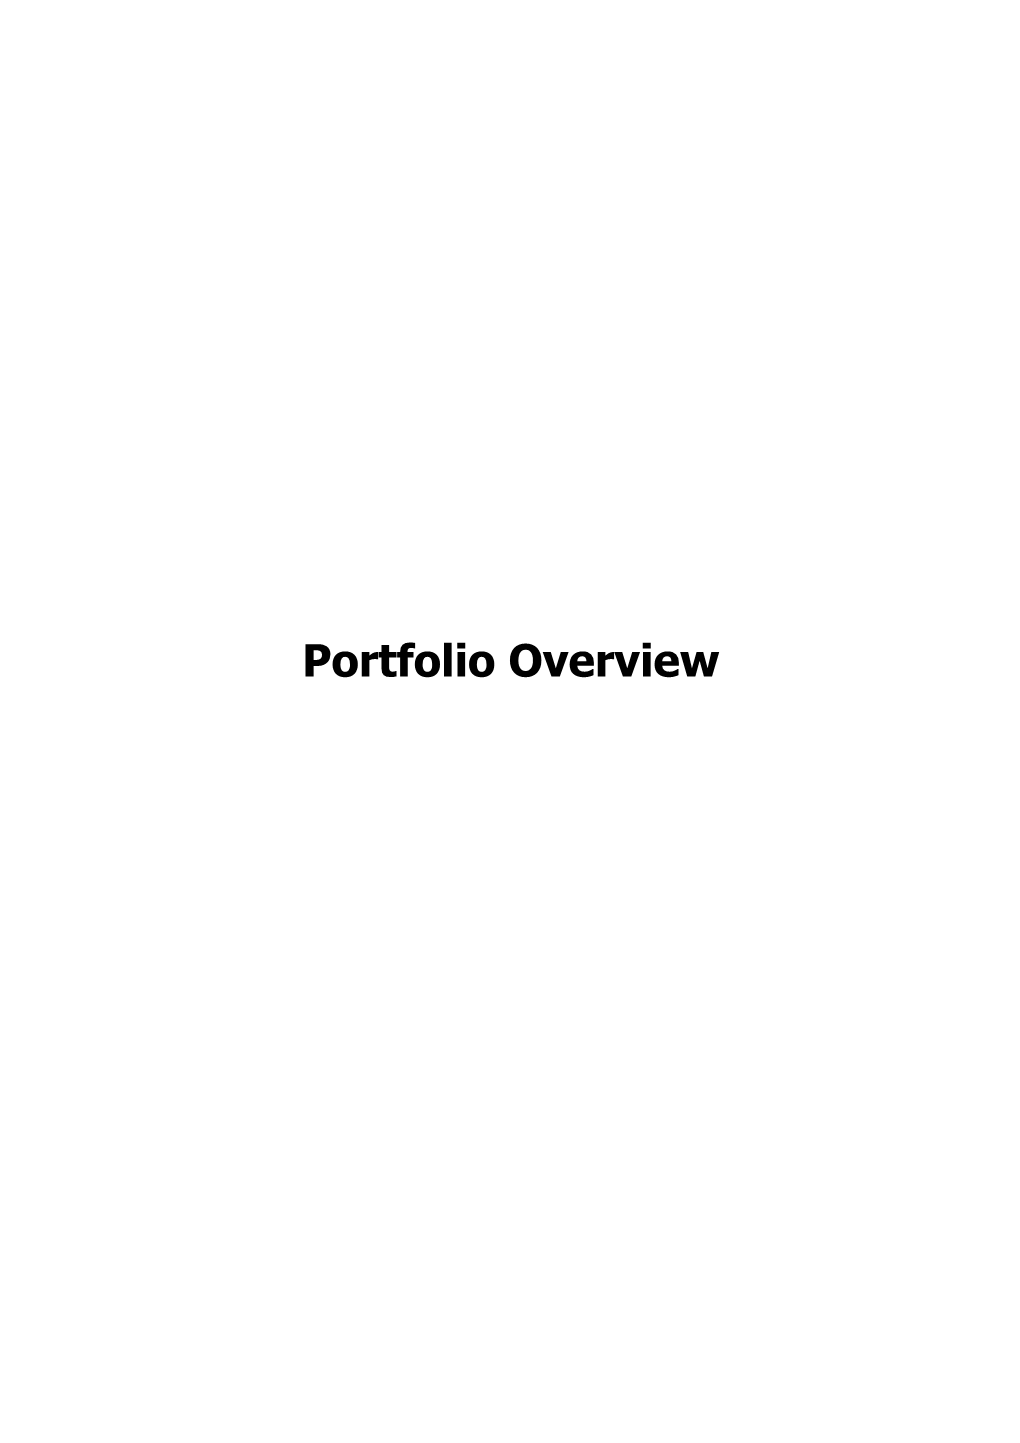 Education, Employment and Workplace Relations Portfolio Overview